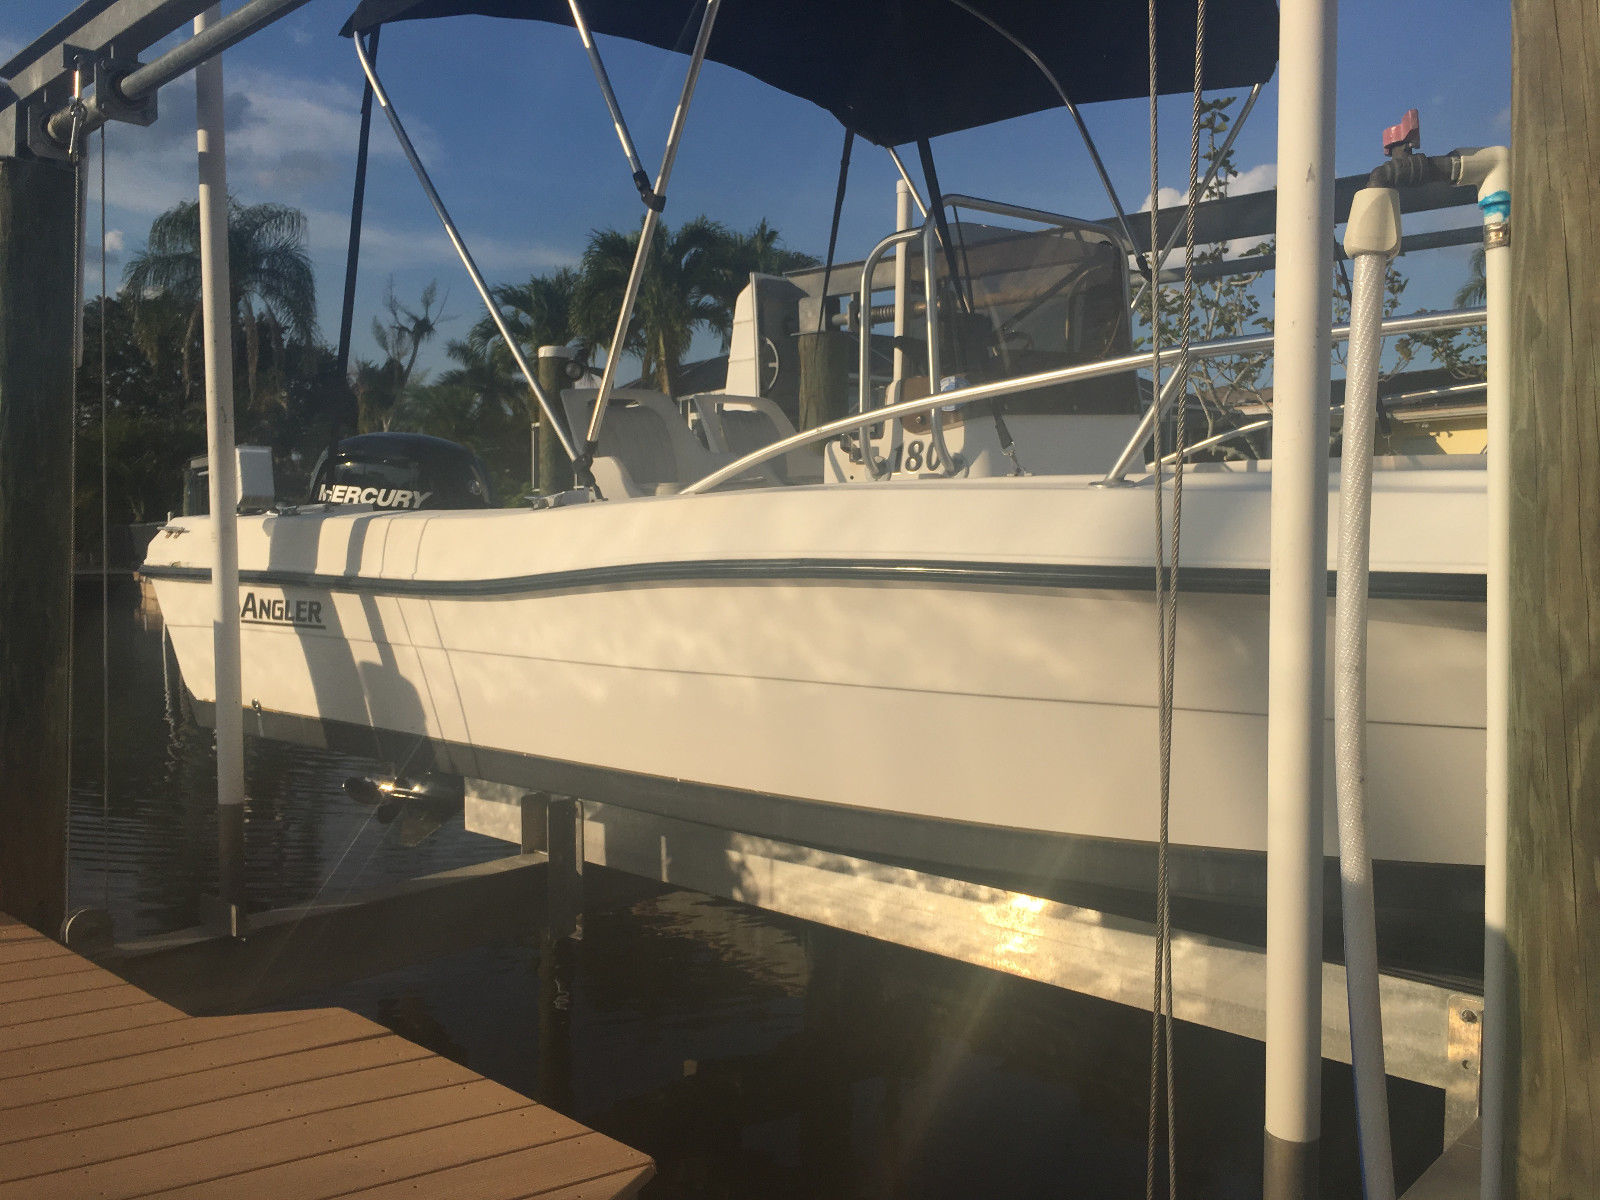 Angler Boat 180 2001 for sale for $9,850 - Boats-from-USA.com